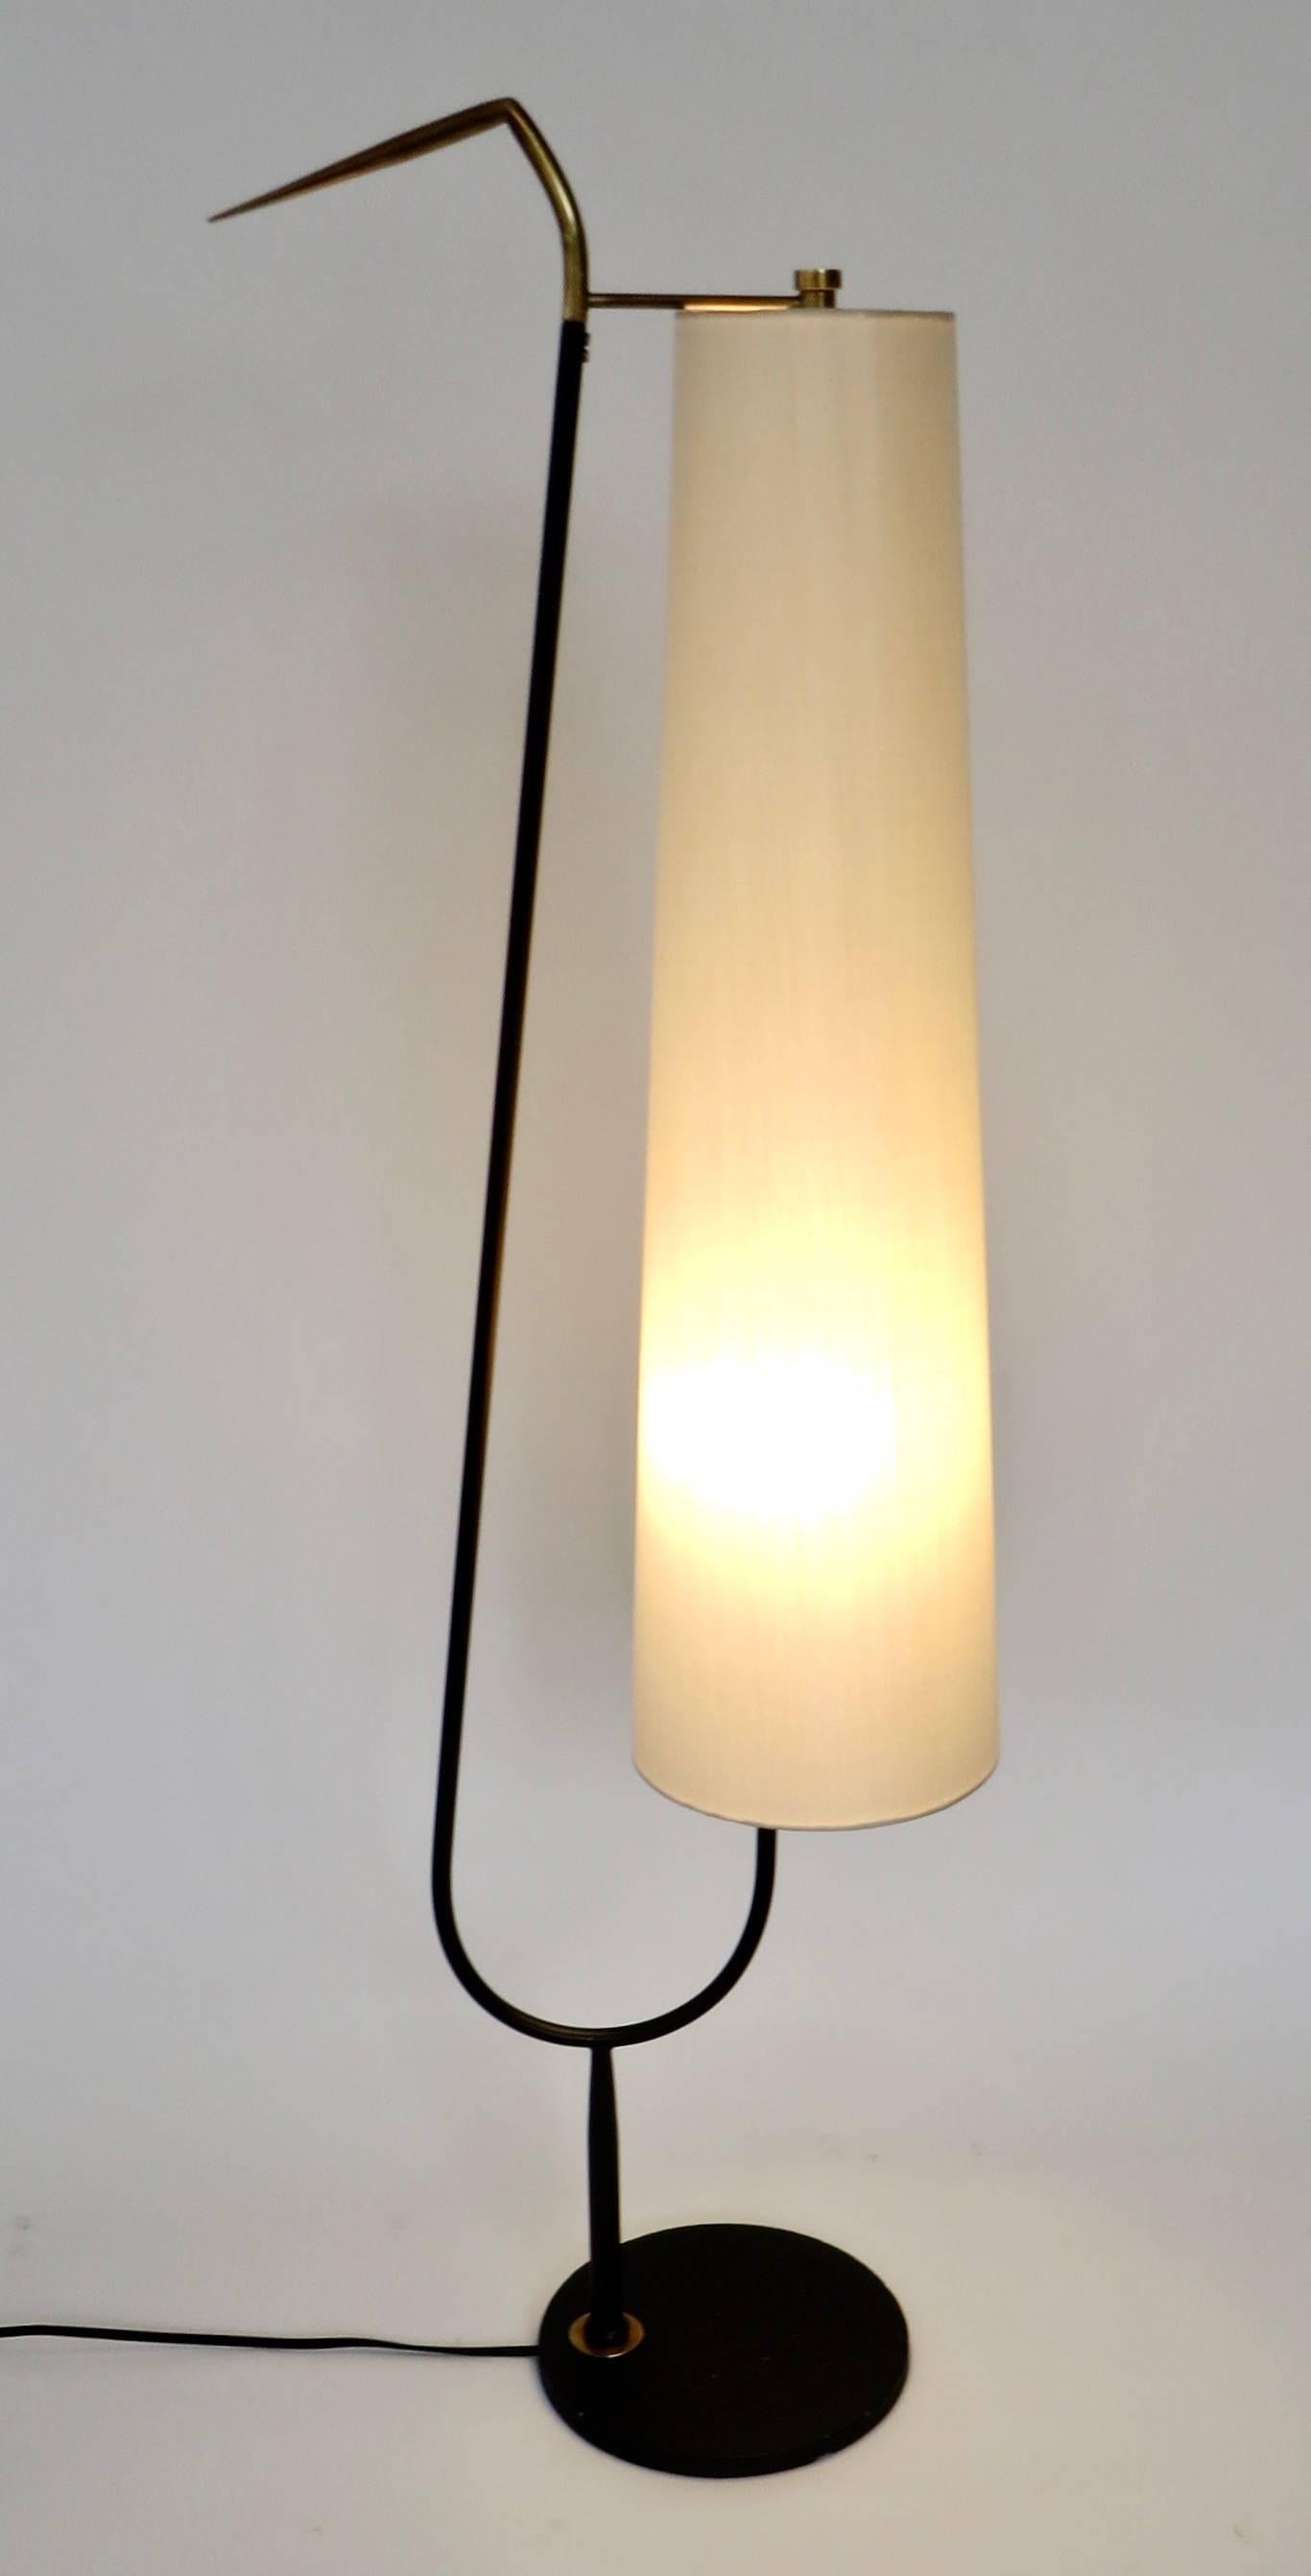 Mid-20th Century Maison Lunel French Standing Floor Lamp with Cream Linen Shade, 1950s